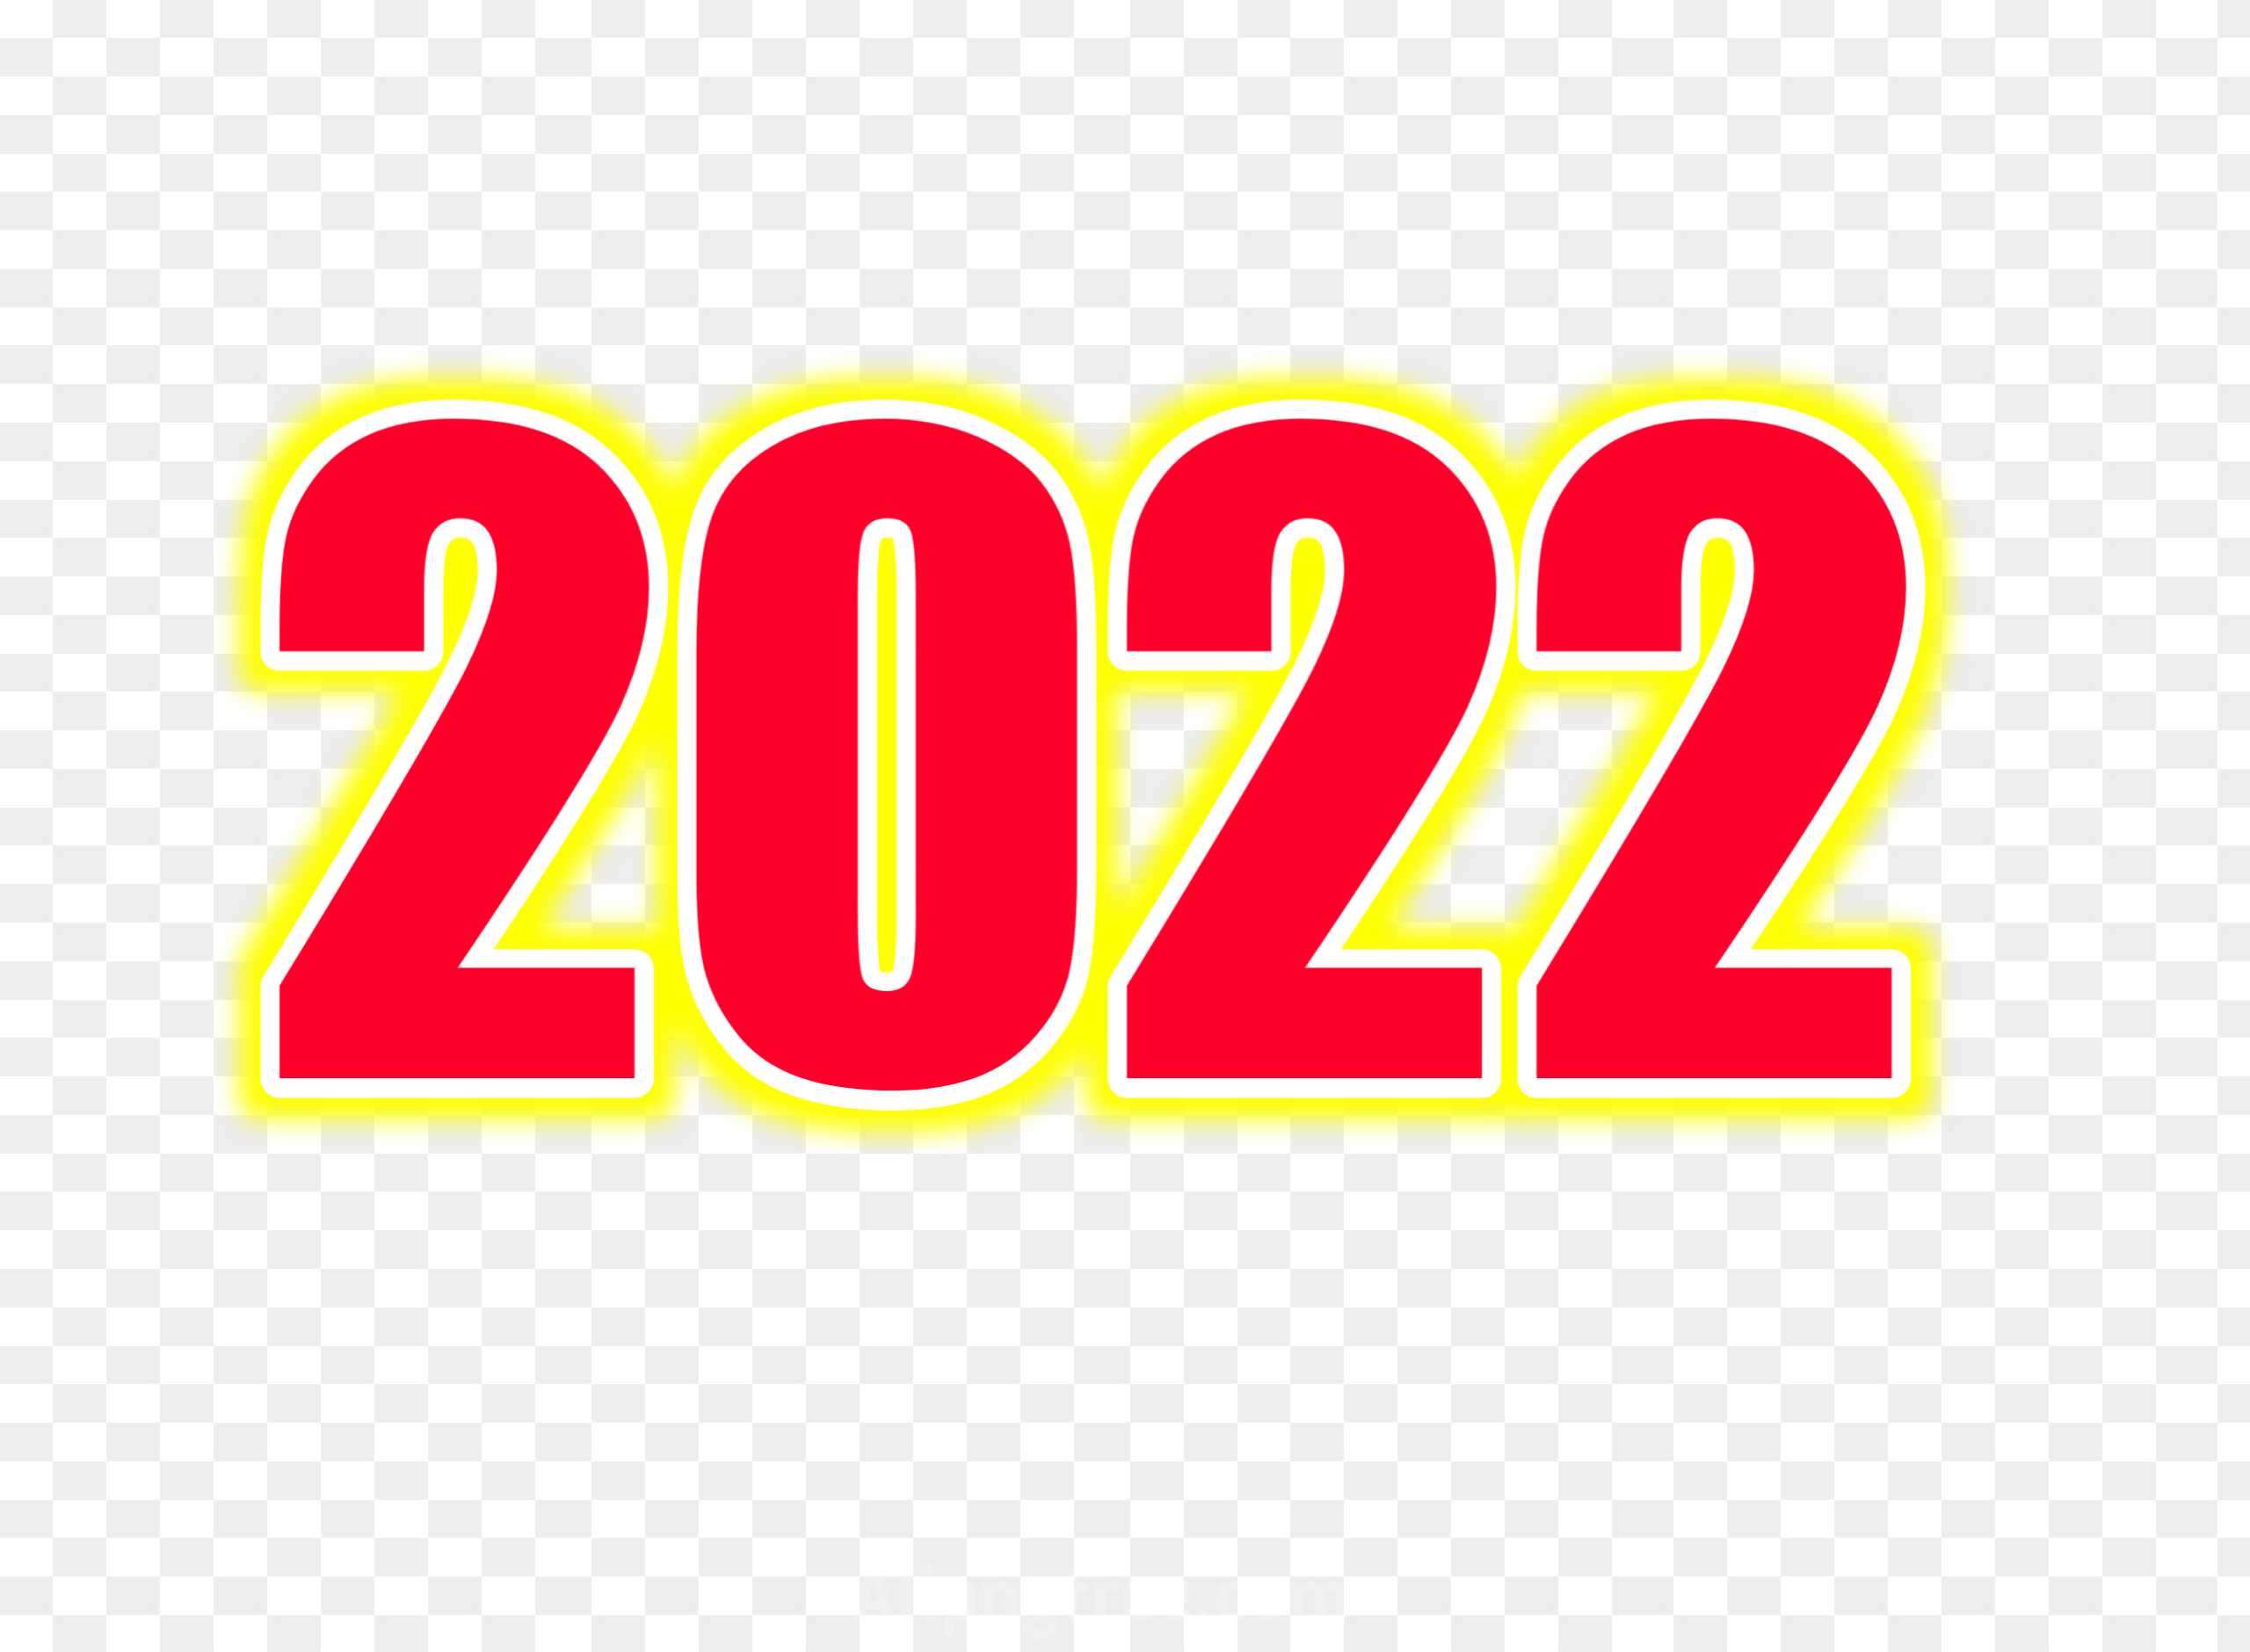 2022 new year PNG download